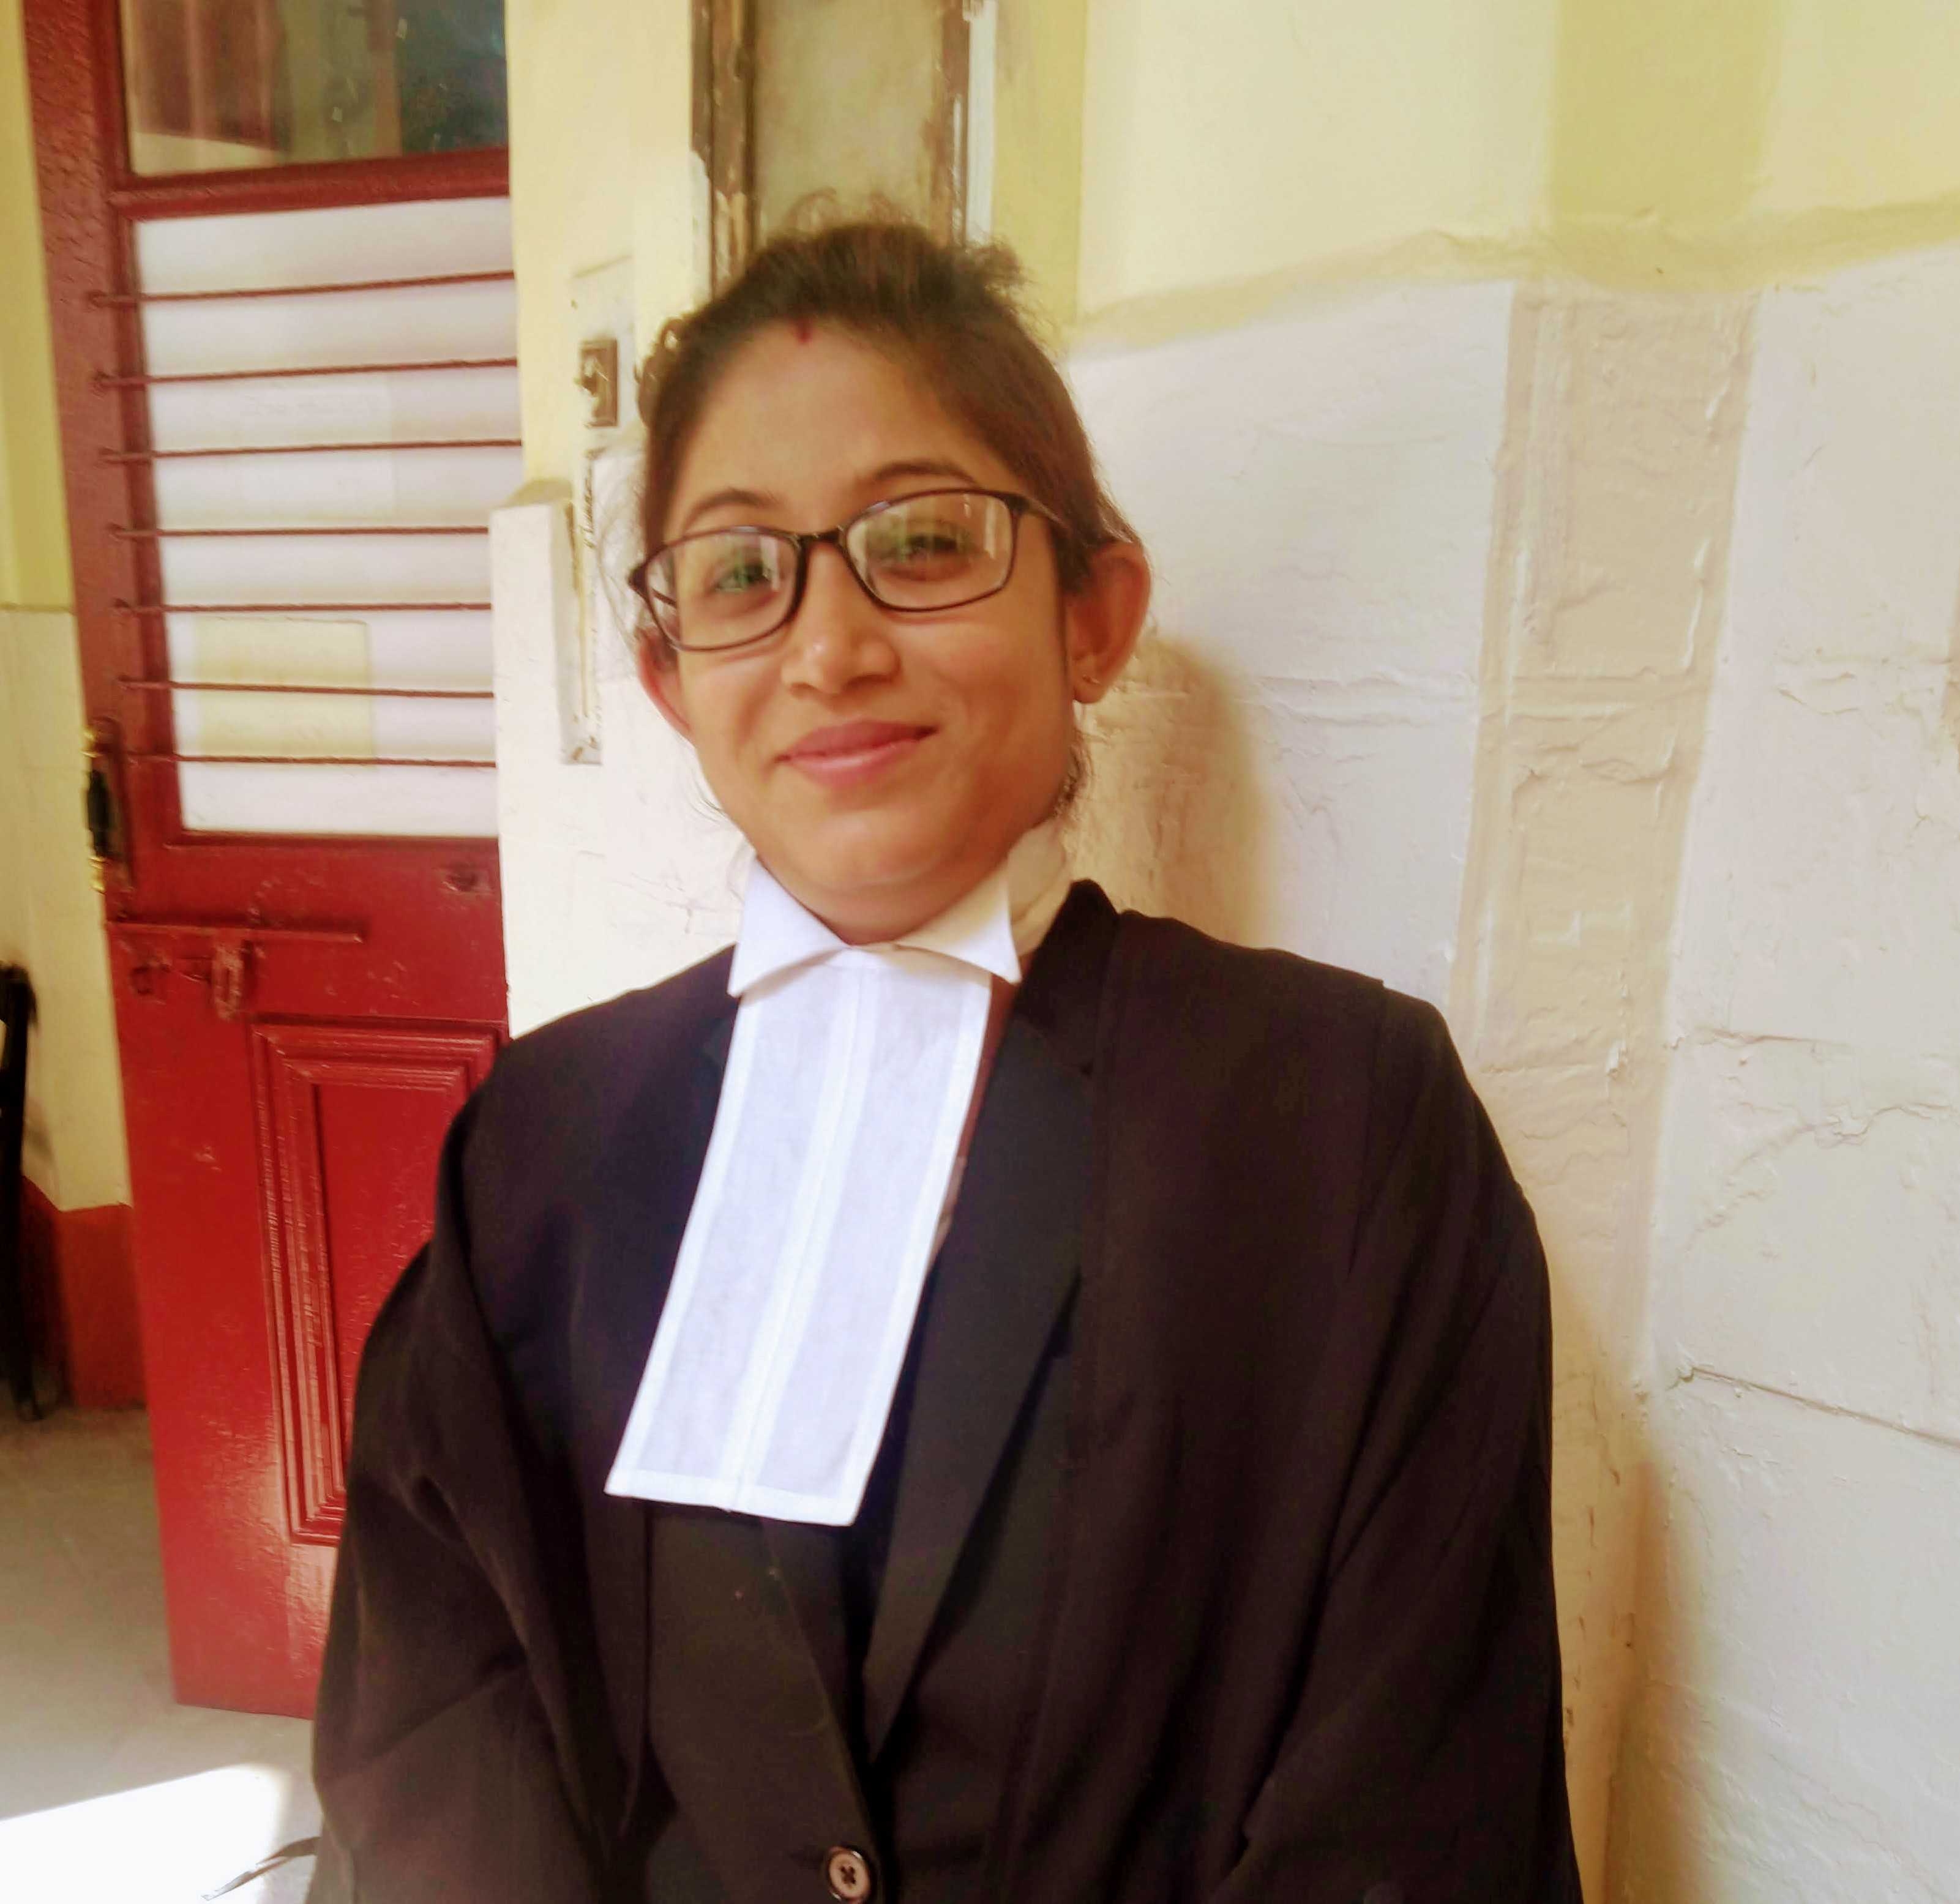 Judicial officers for summer-friendly dress code in courts | Kochi News -  The Hindu